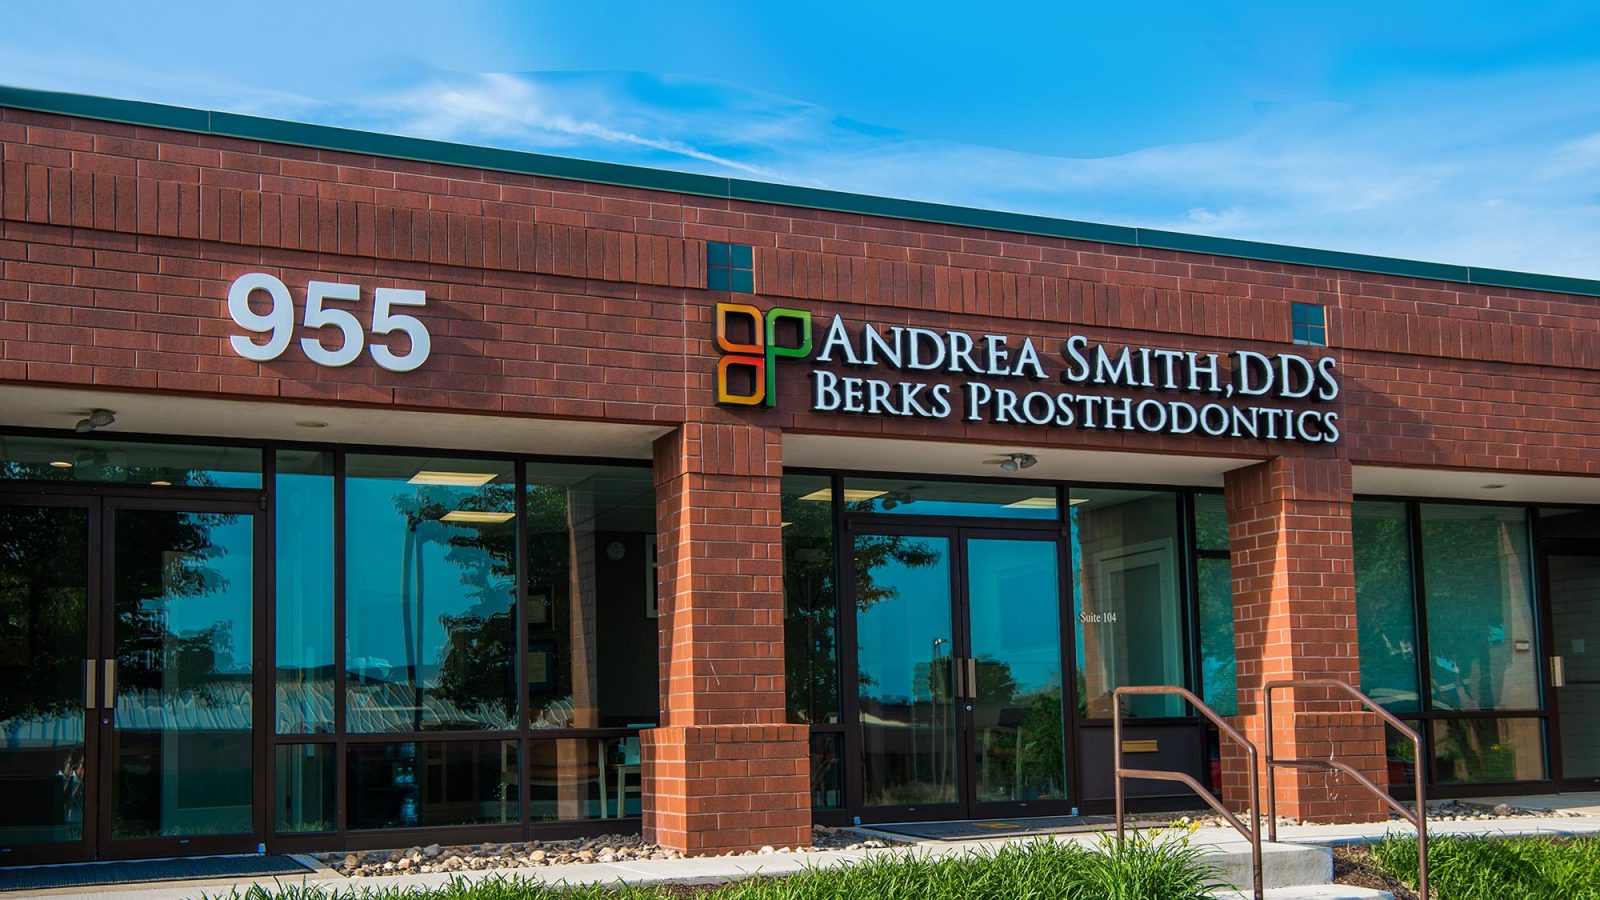 Dr. Andrea Smith , DDS. - Prosthodontist - Office